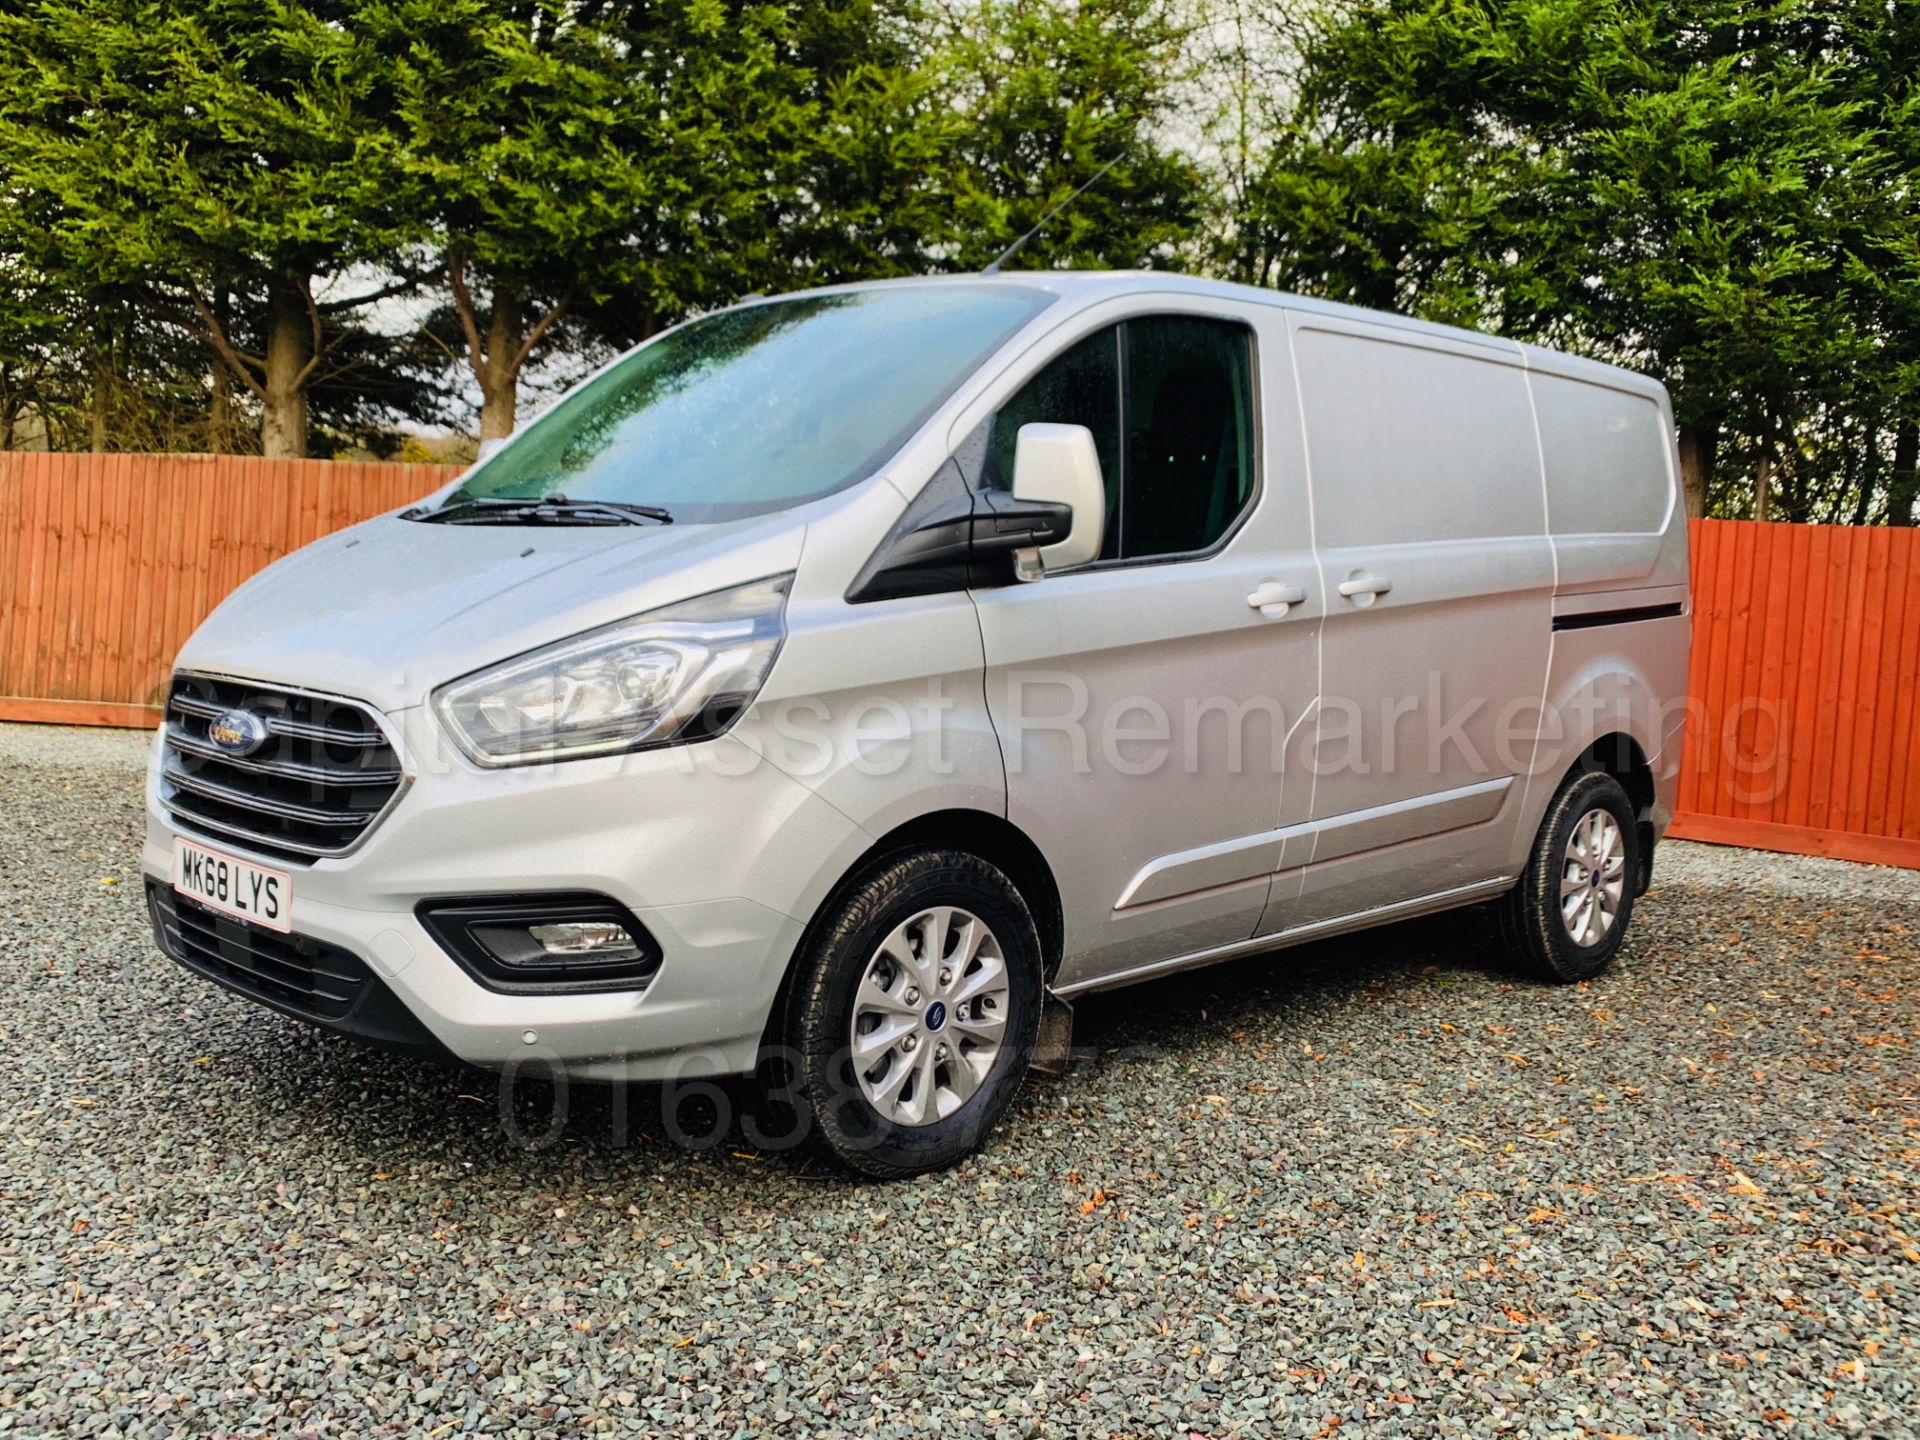 FORD TRANSIT CUSTOM *LIMITED EDTION* (2018 - 68 REG) '2.0 TDCI - 130 BHP - 6 SPEED' *ALL NEW MODEL* - Image 7 of 51